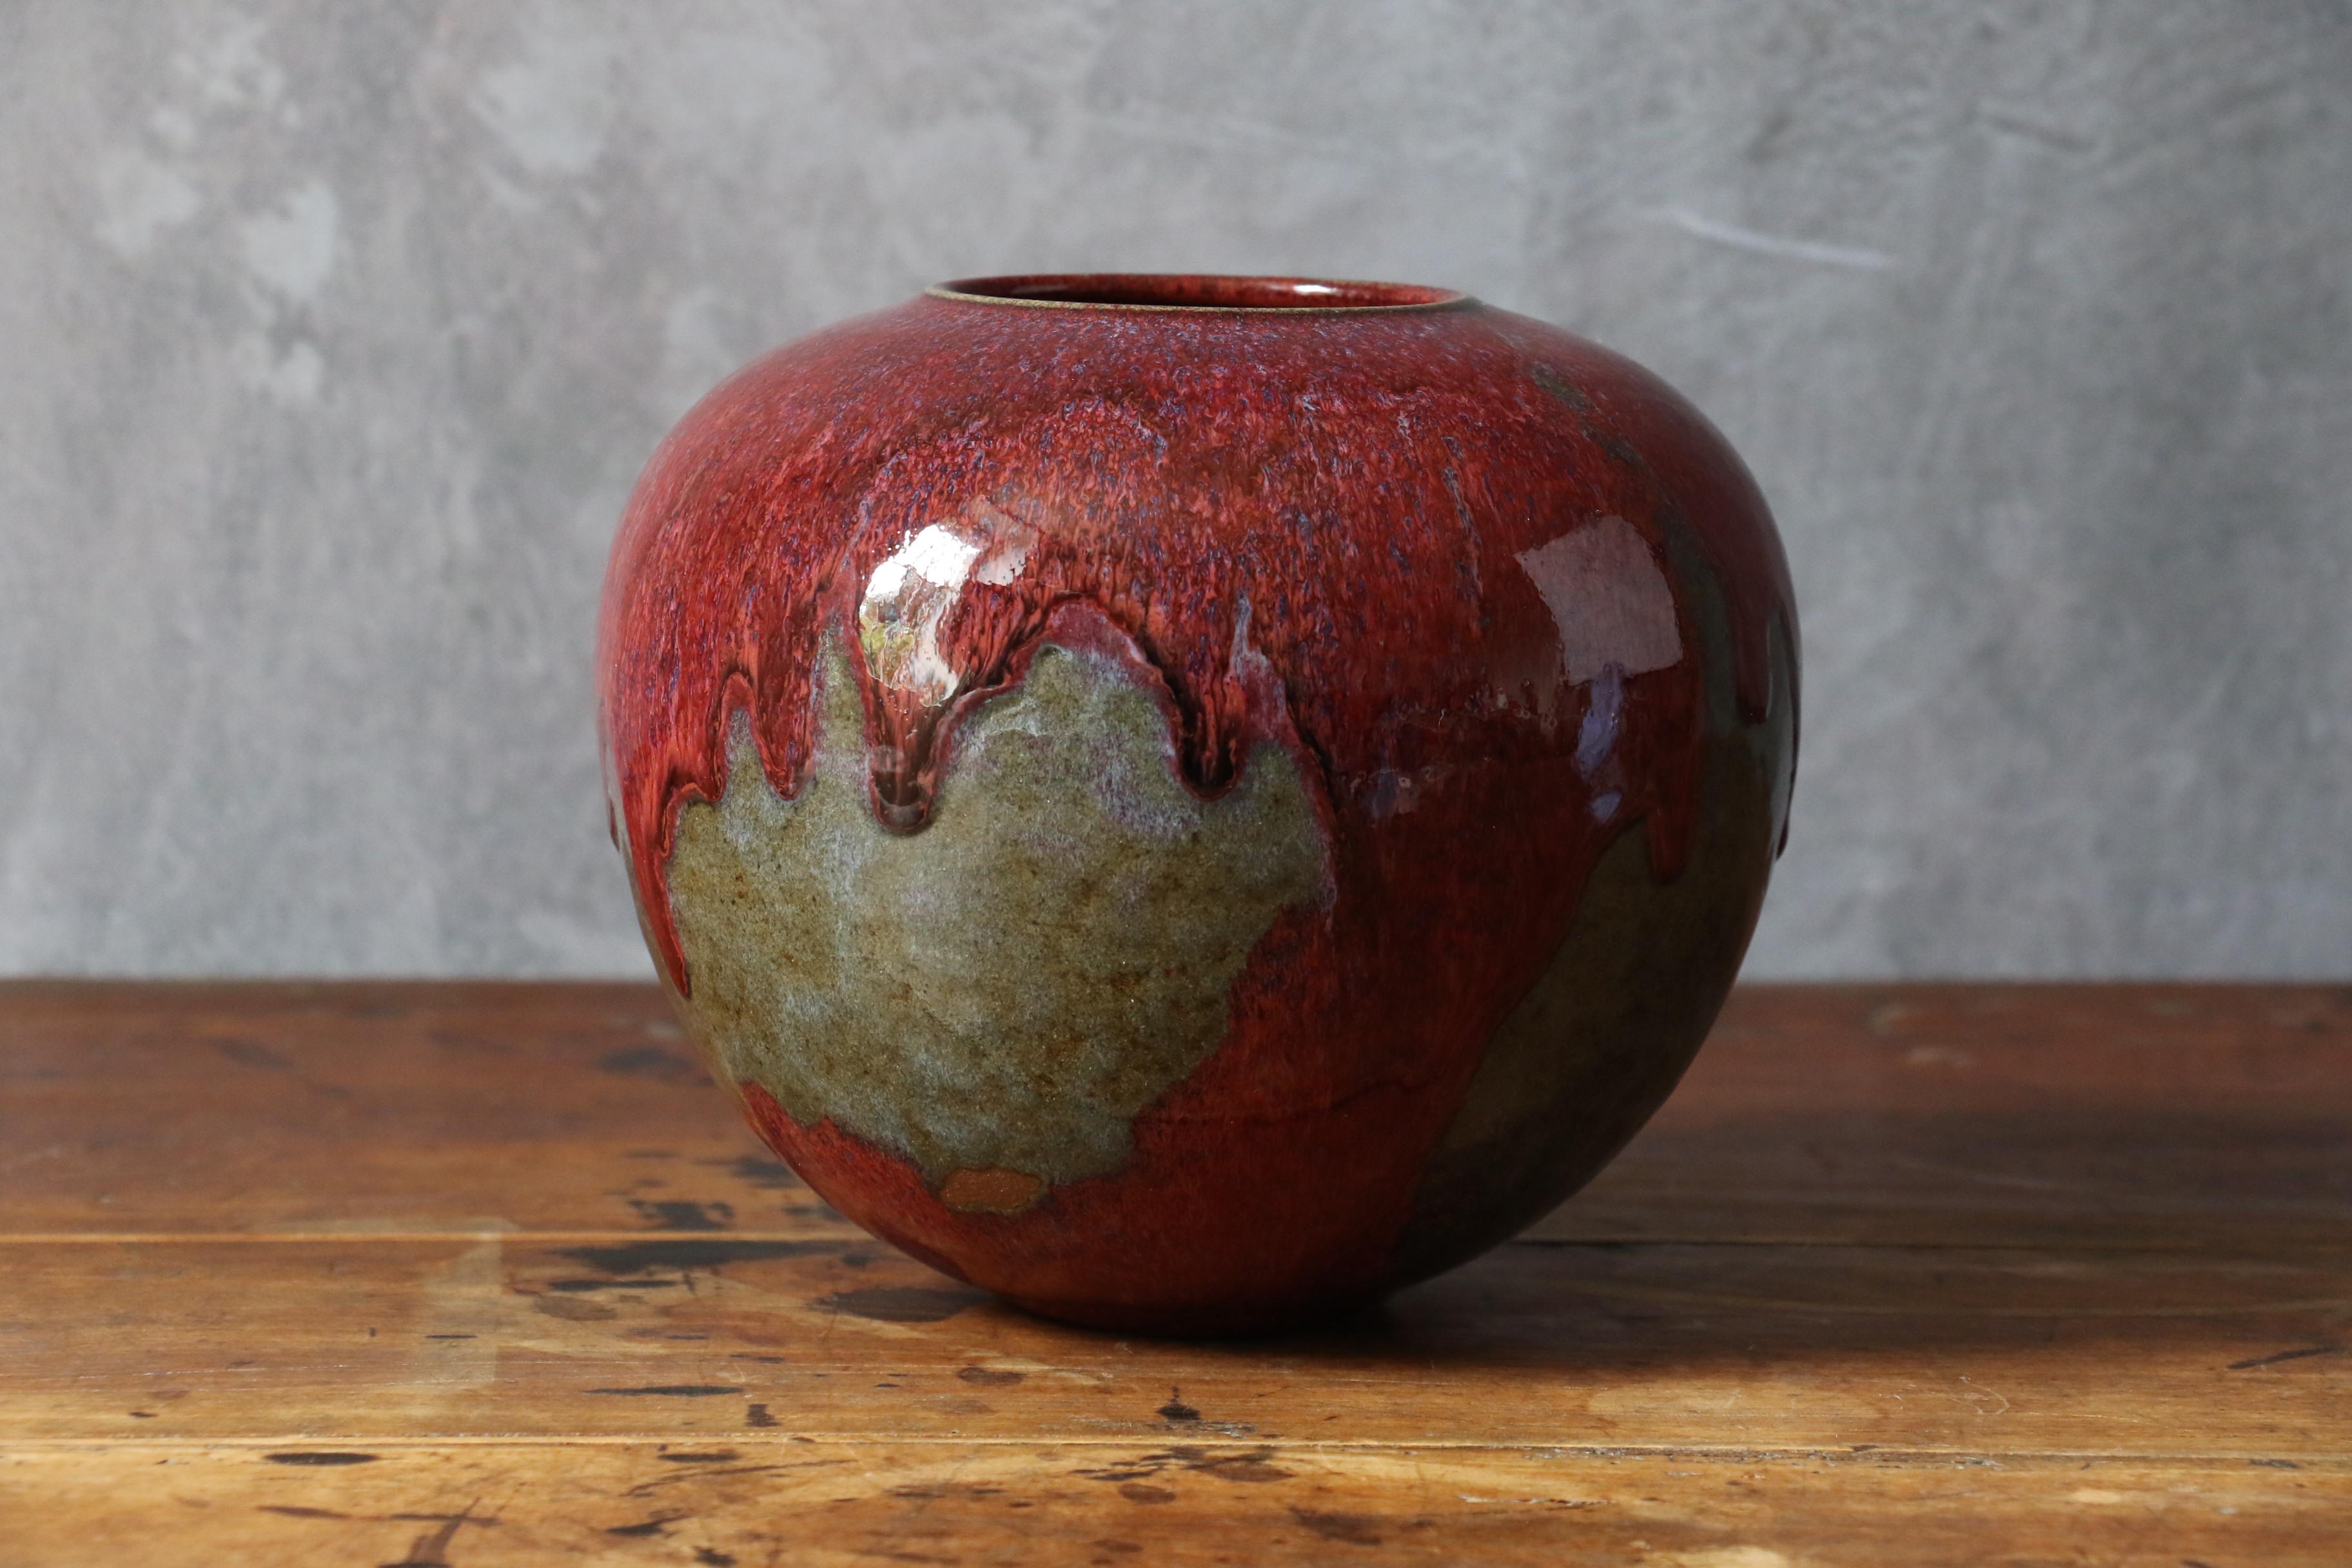 Red and grey ceramic vase by the french ceramist Marc Uzan, Midcentury Modern

Stunning red and gray ceramic vase. The strength of the red is enhanced by the texture, creating a beautiful effect.

More about the artist:

Born in Sousse, Tunisia in